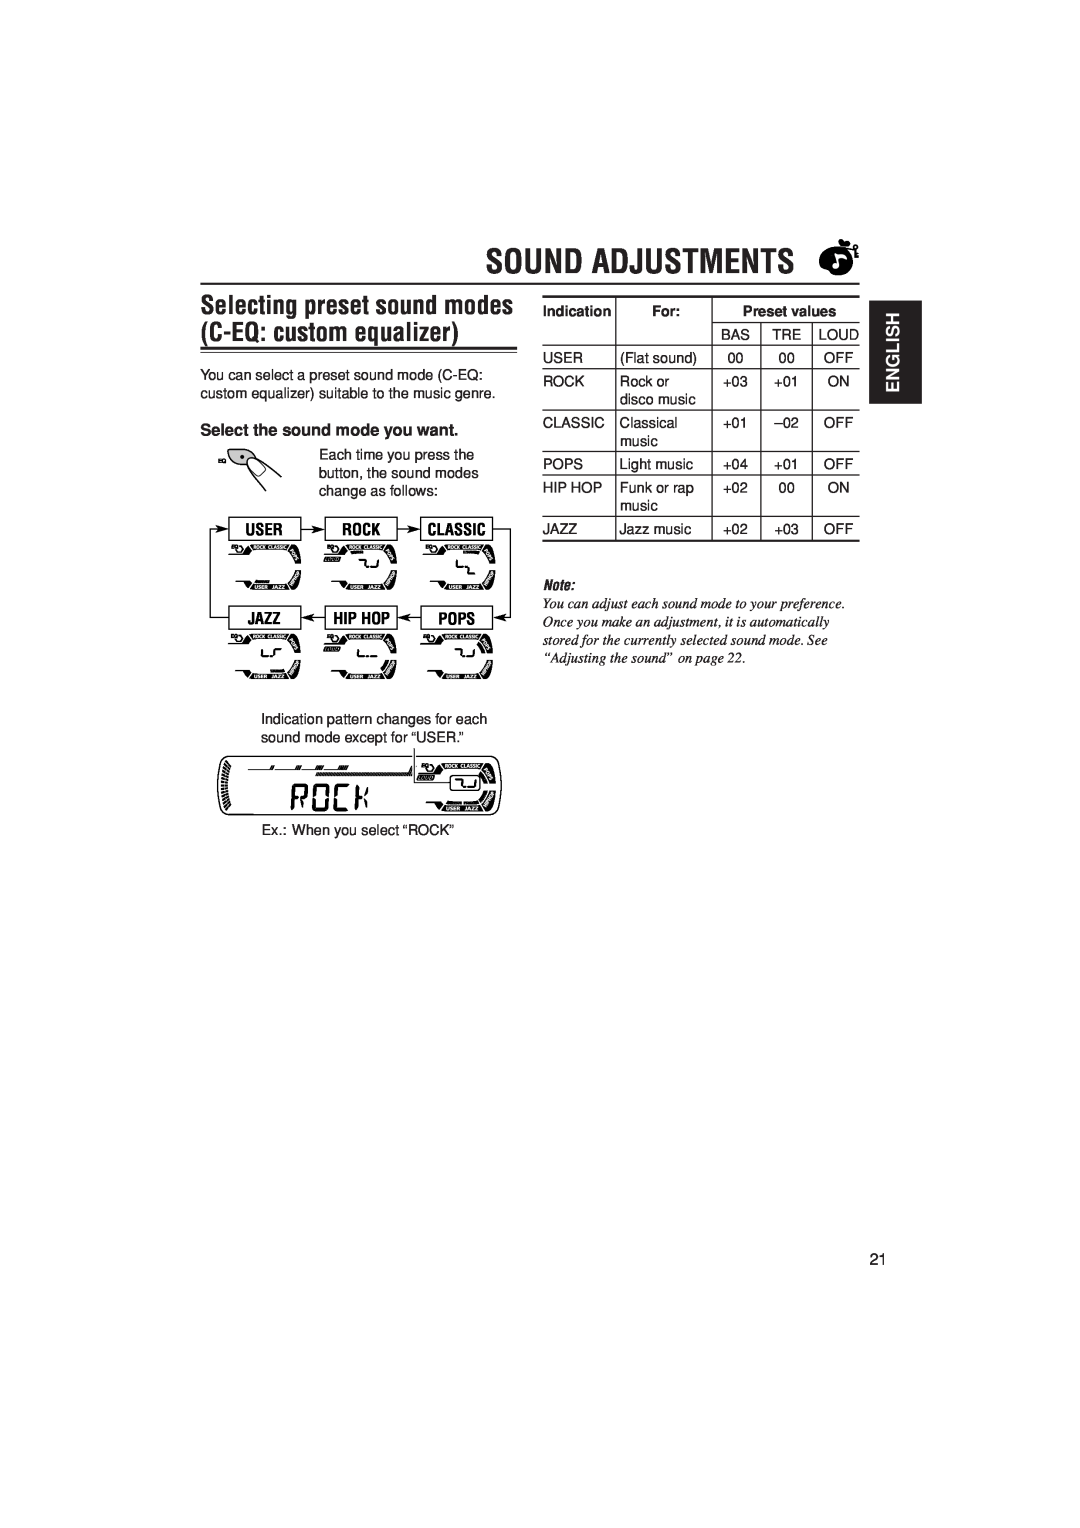 JVC KD-G407 Sound Adjustments, English, Select the sound mode you want, User Rock Classic, Jazz, Pops, Hip Hop, Indication 